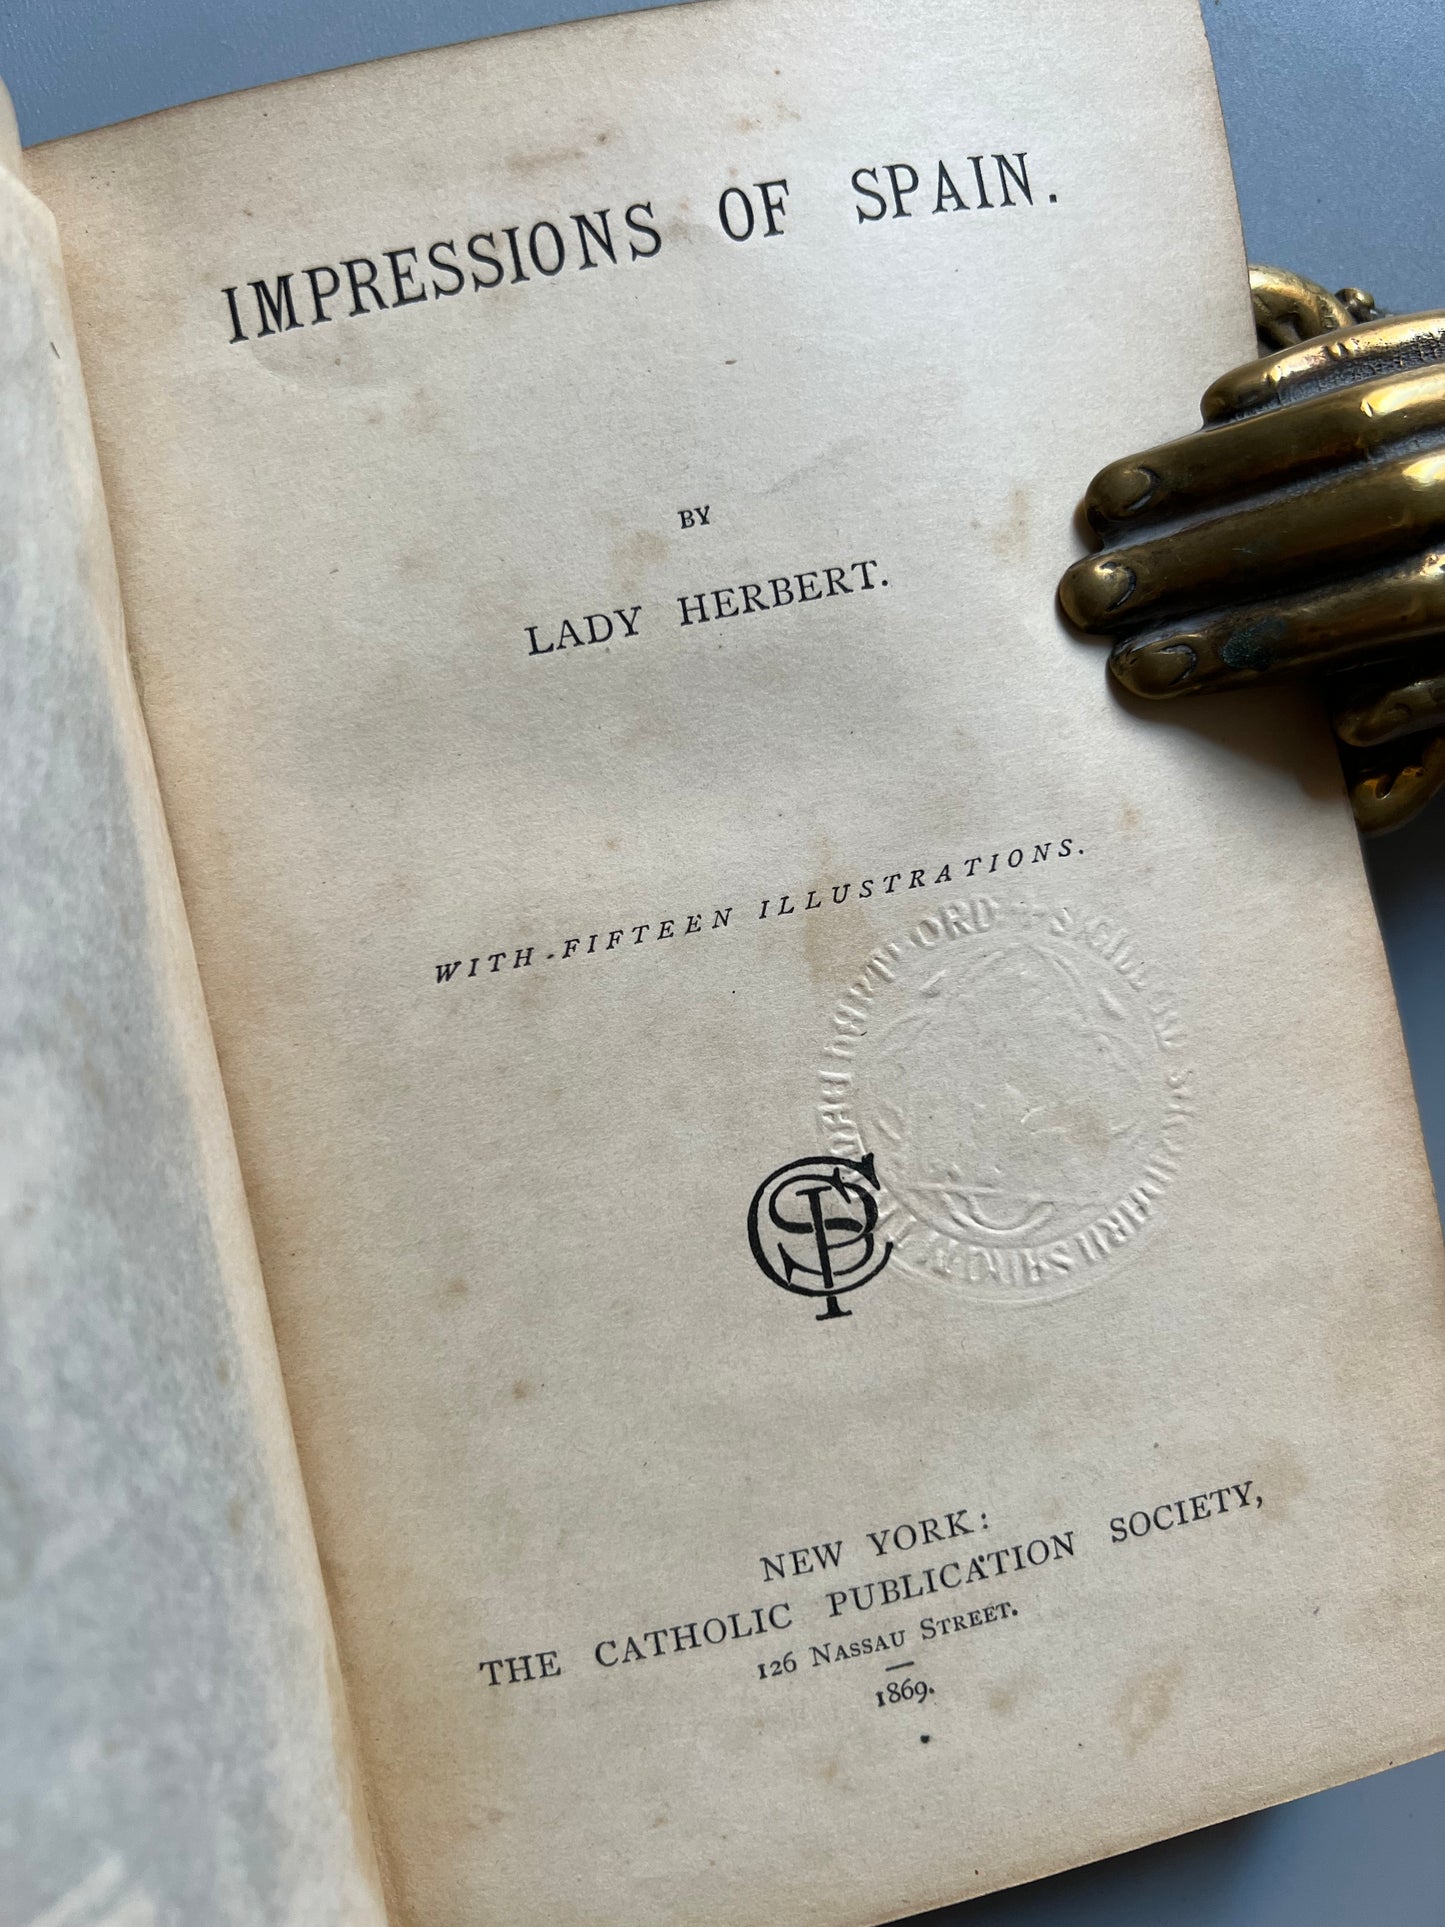 Impresions of Spain, Lady Herbert - The catholic publication, 1869